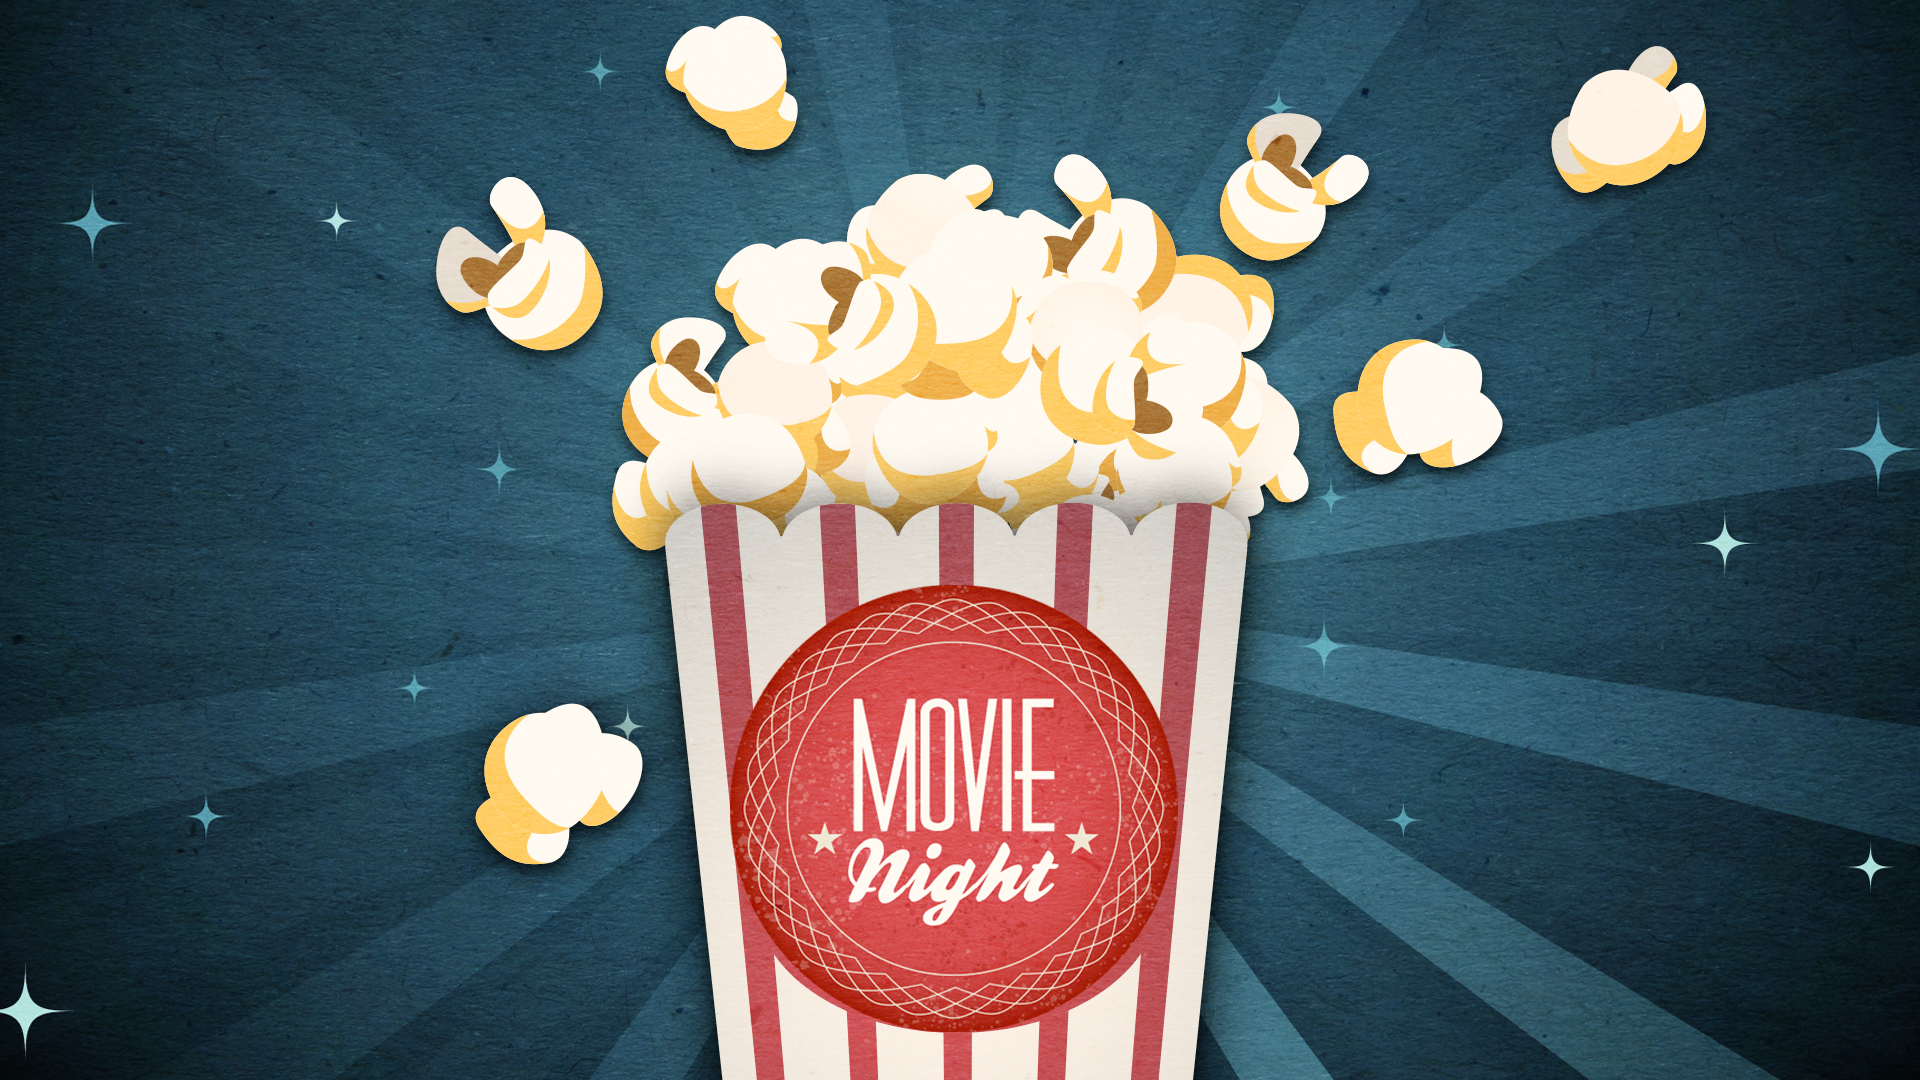 Movie Night: Thursday December 8th from 6pm to 7pm